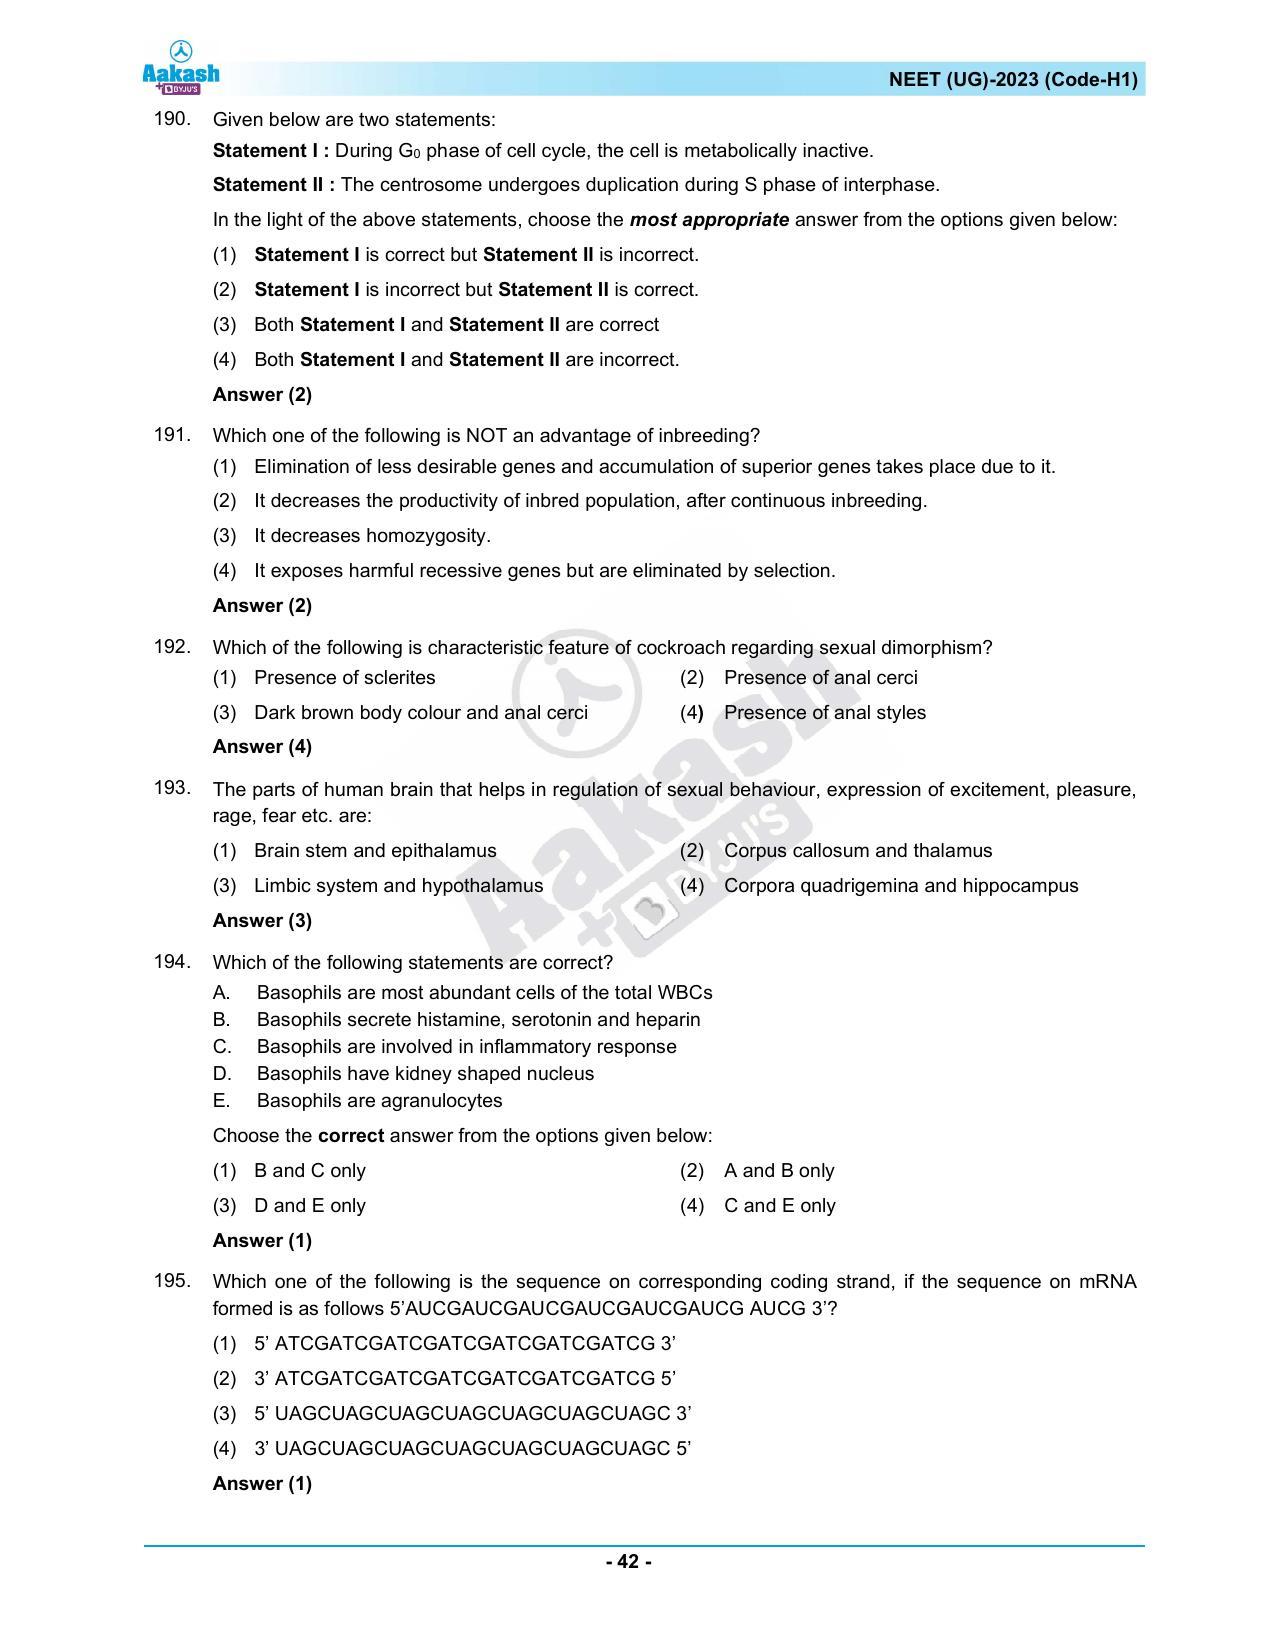 NEET 2023 Question Paper H1 - Page 42